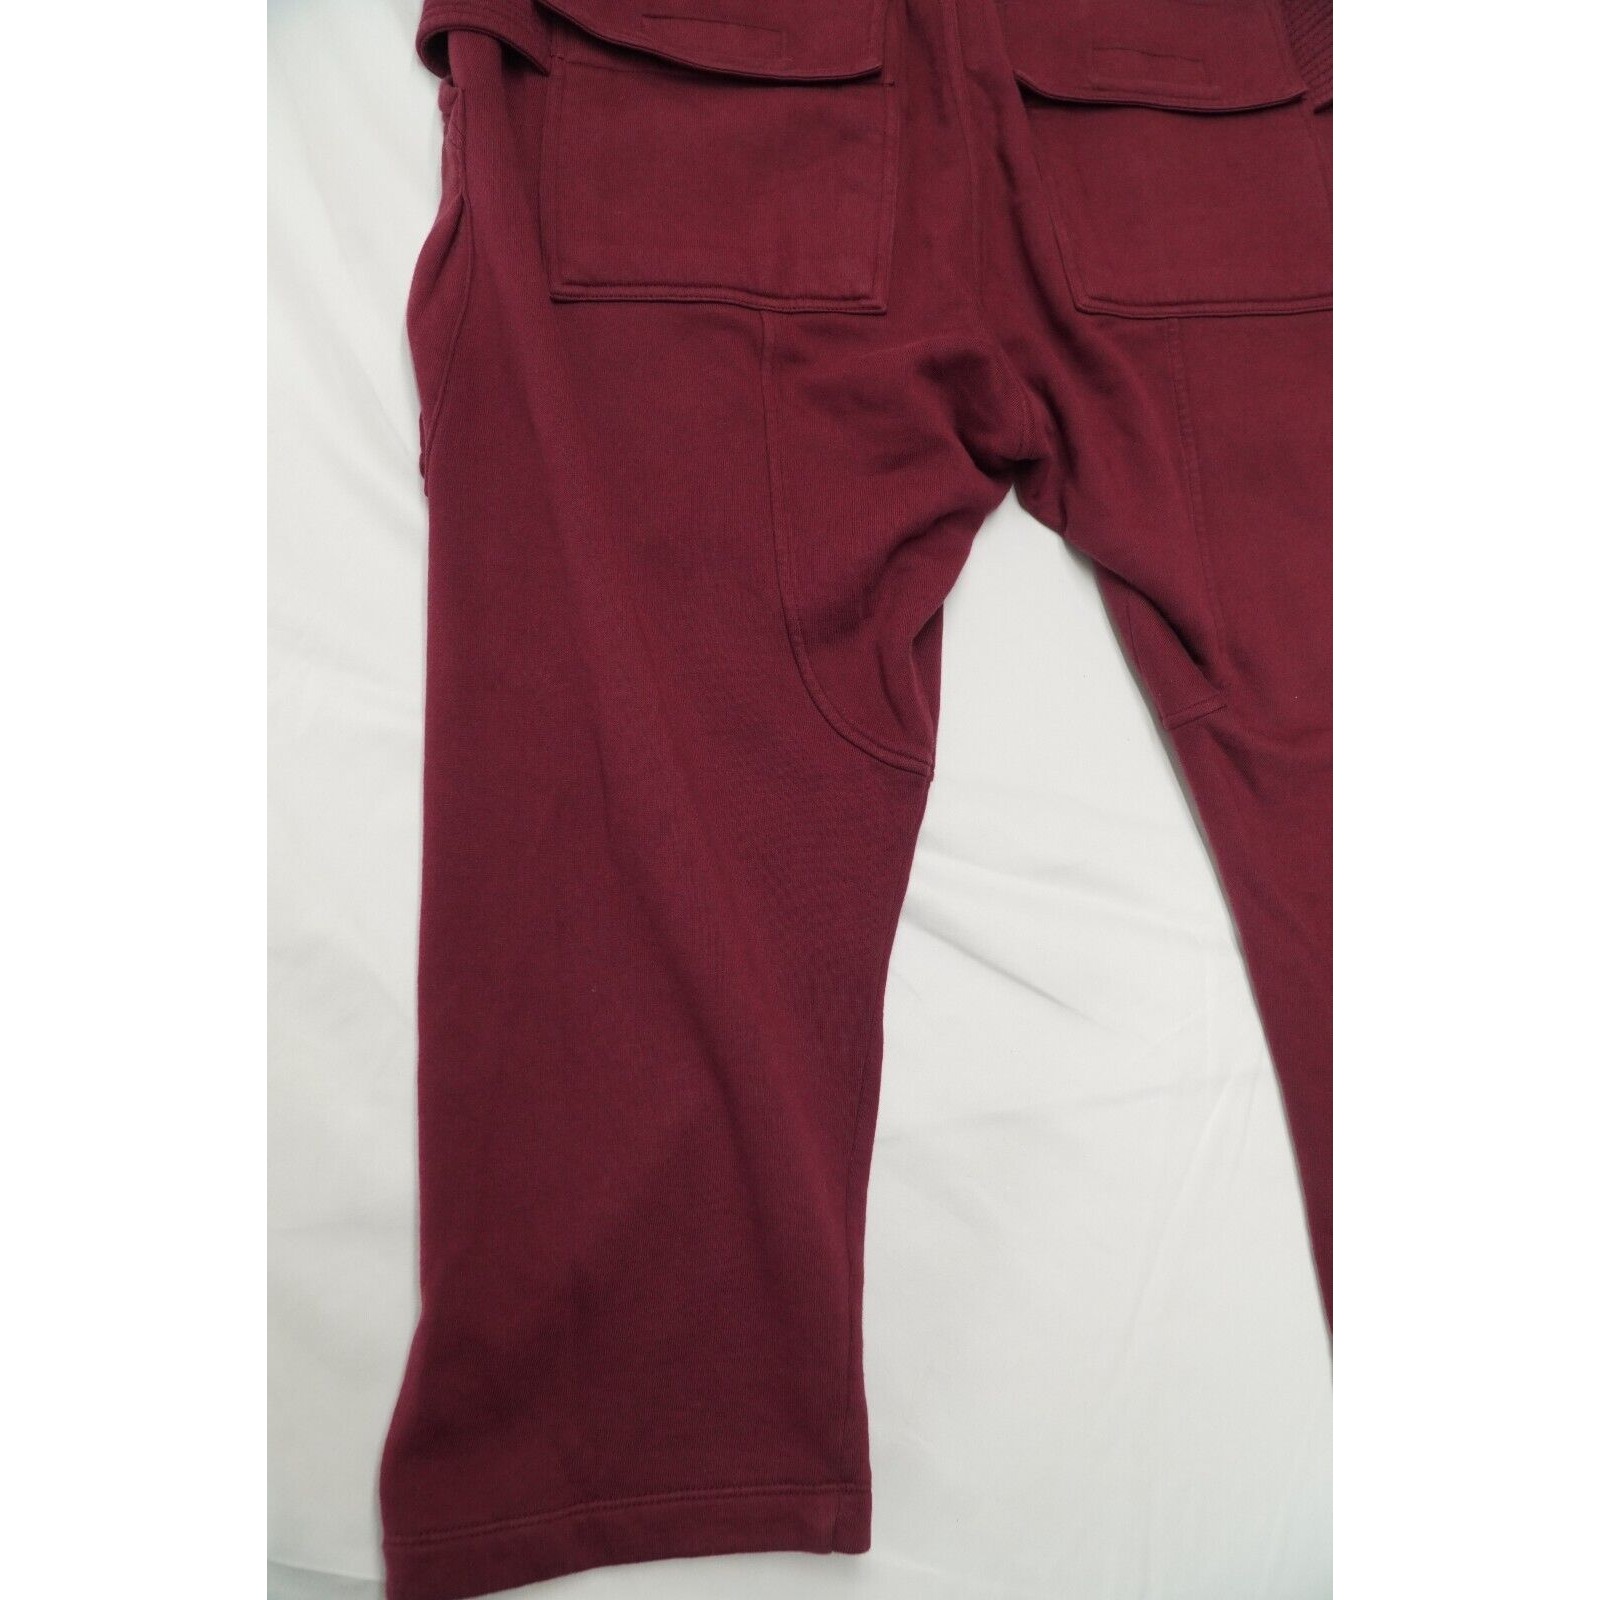 Rick Creatch Cargo Cropped Sweatpant Bruise Red FW20 - 12